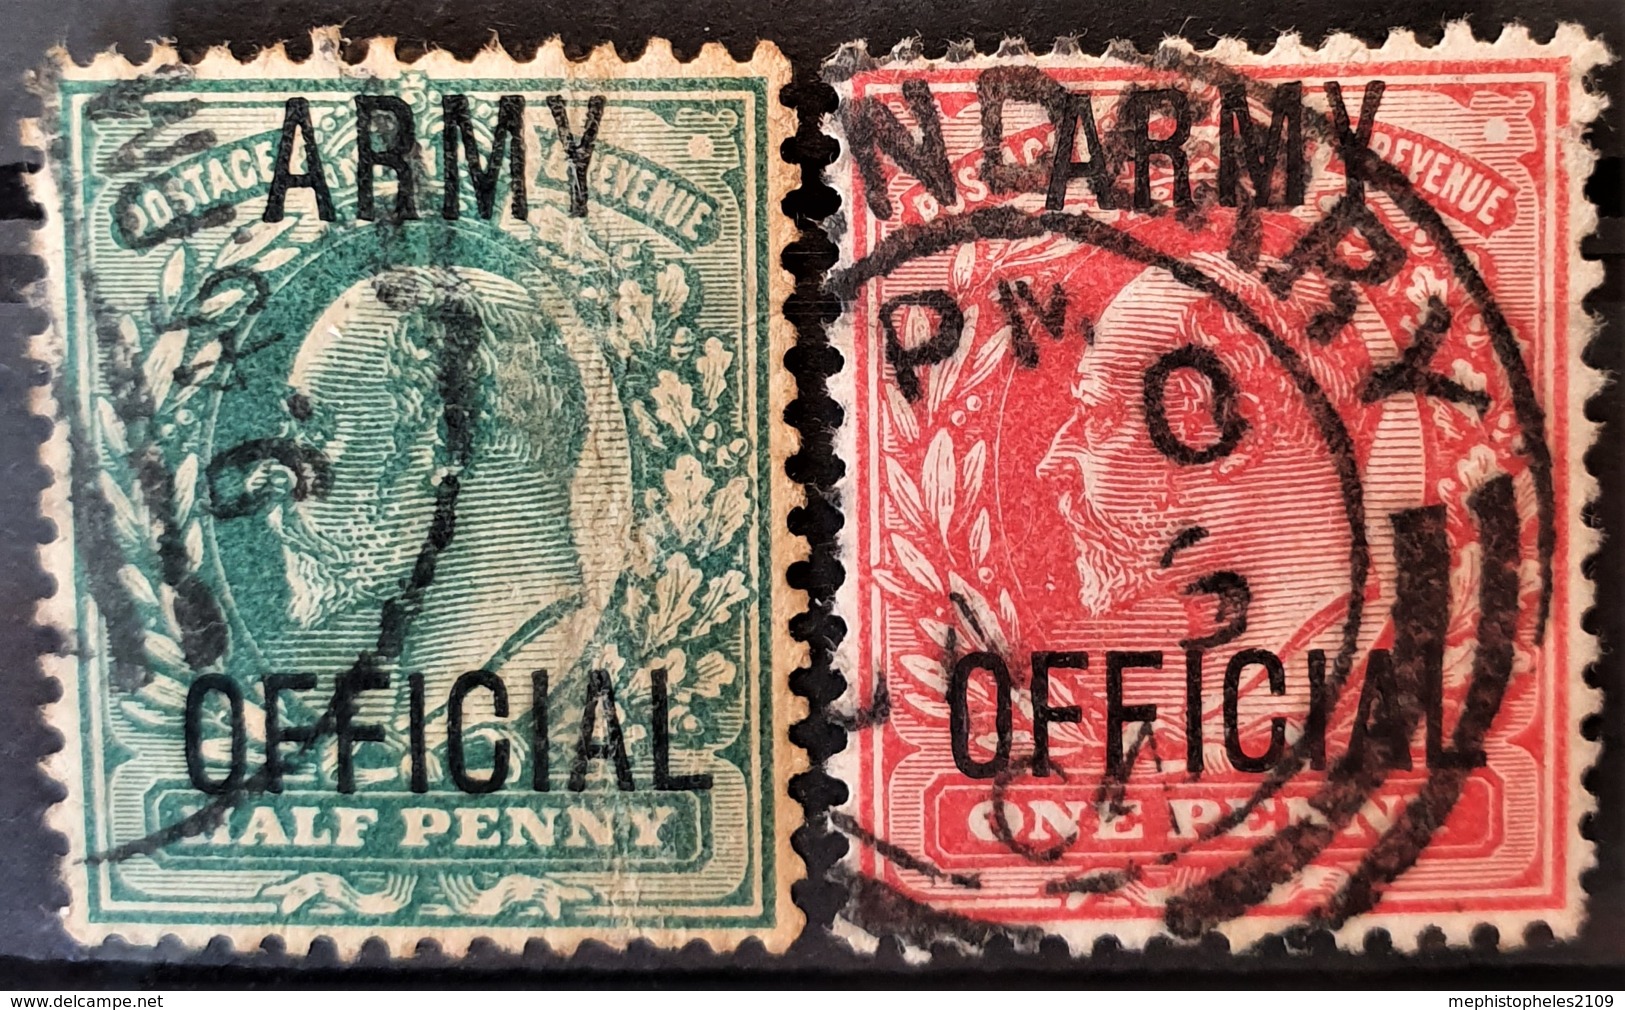 GREAT BRITAIN 1902 - Canceled - Sc# O59, O60 - Army Official 0.5d 1d - Dienstmarken